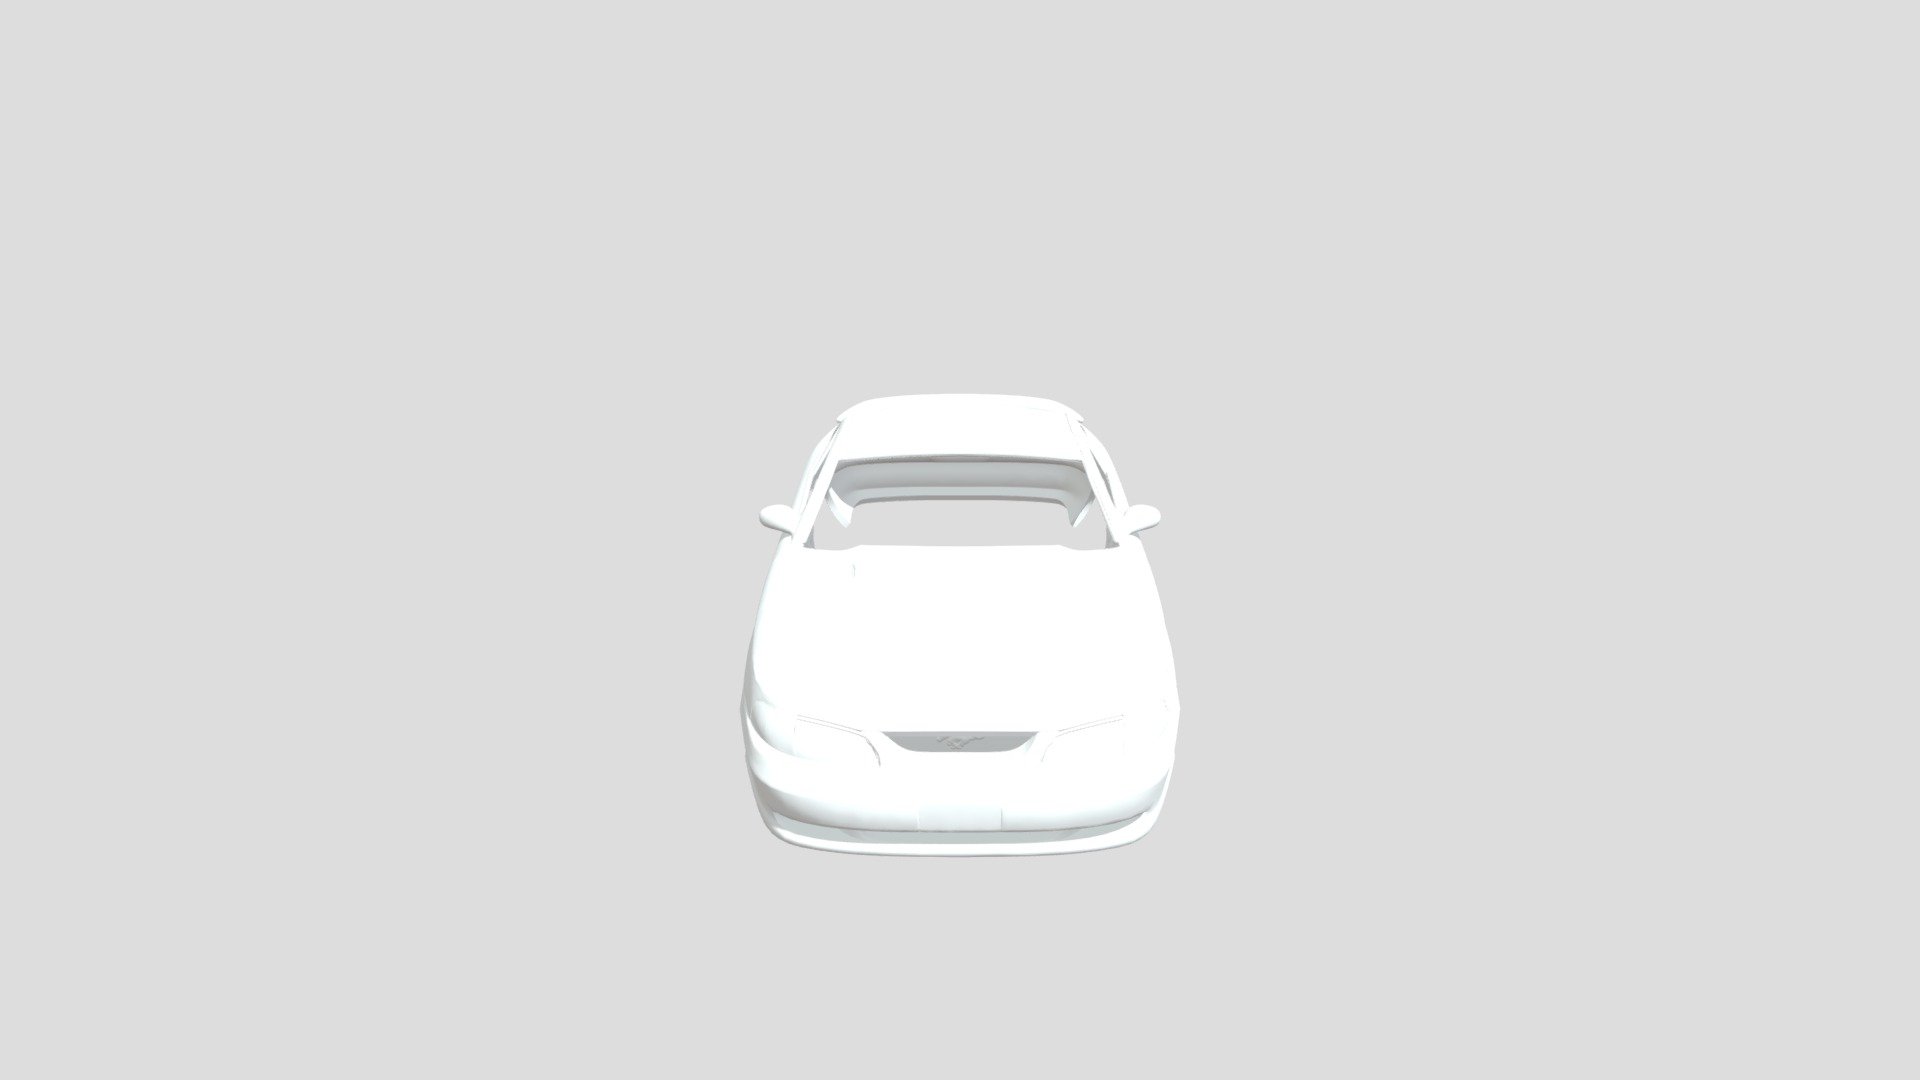 Ford Mustang GT 1998 Printable Body Car, with different wall thicknesses.

All models are prepared to be printed on different scales, the model has several versions with different wall thicknesses to facilitate printing 3d model